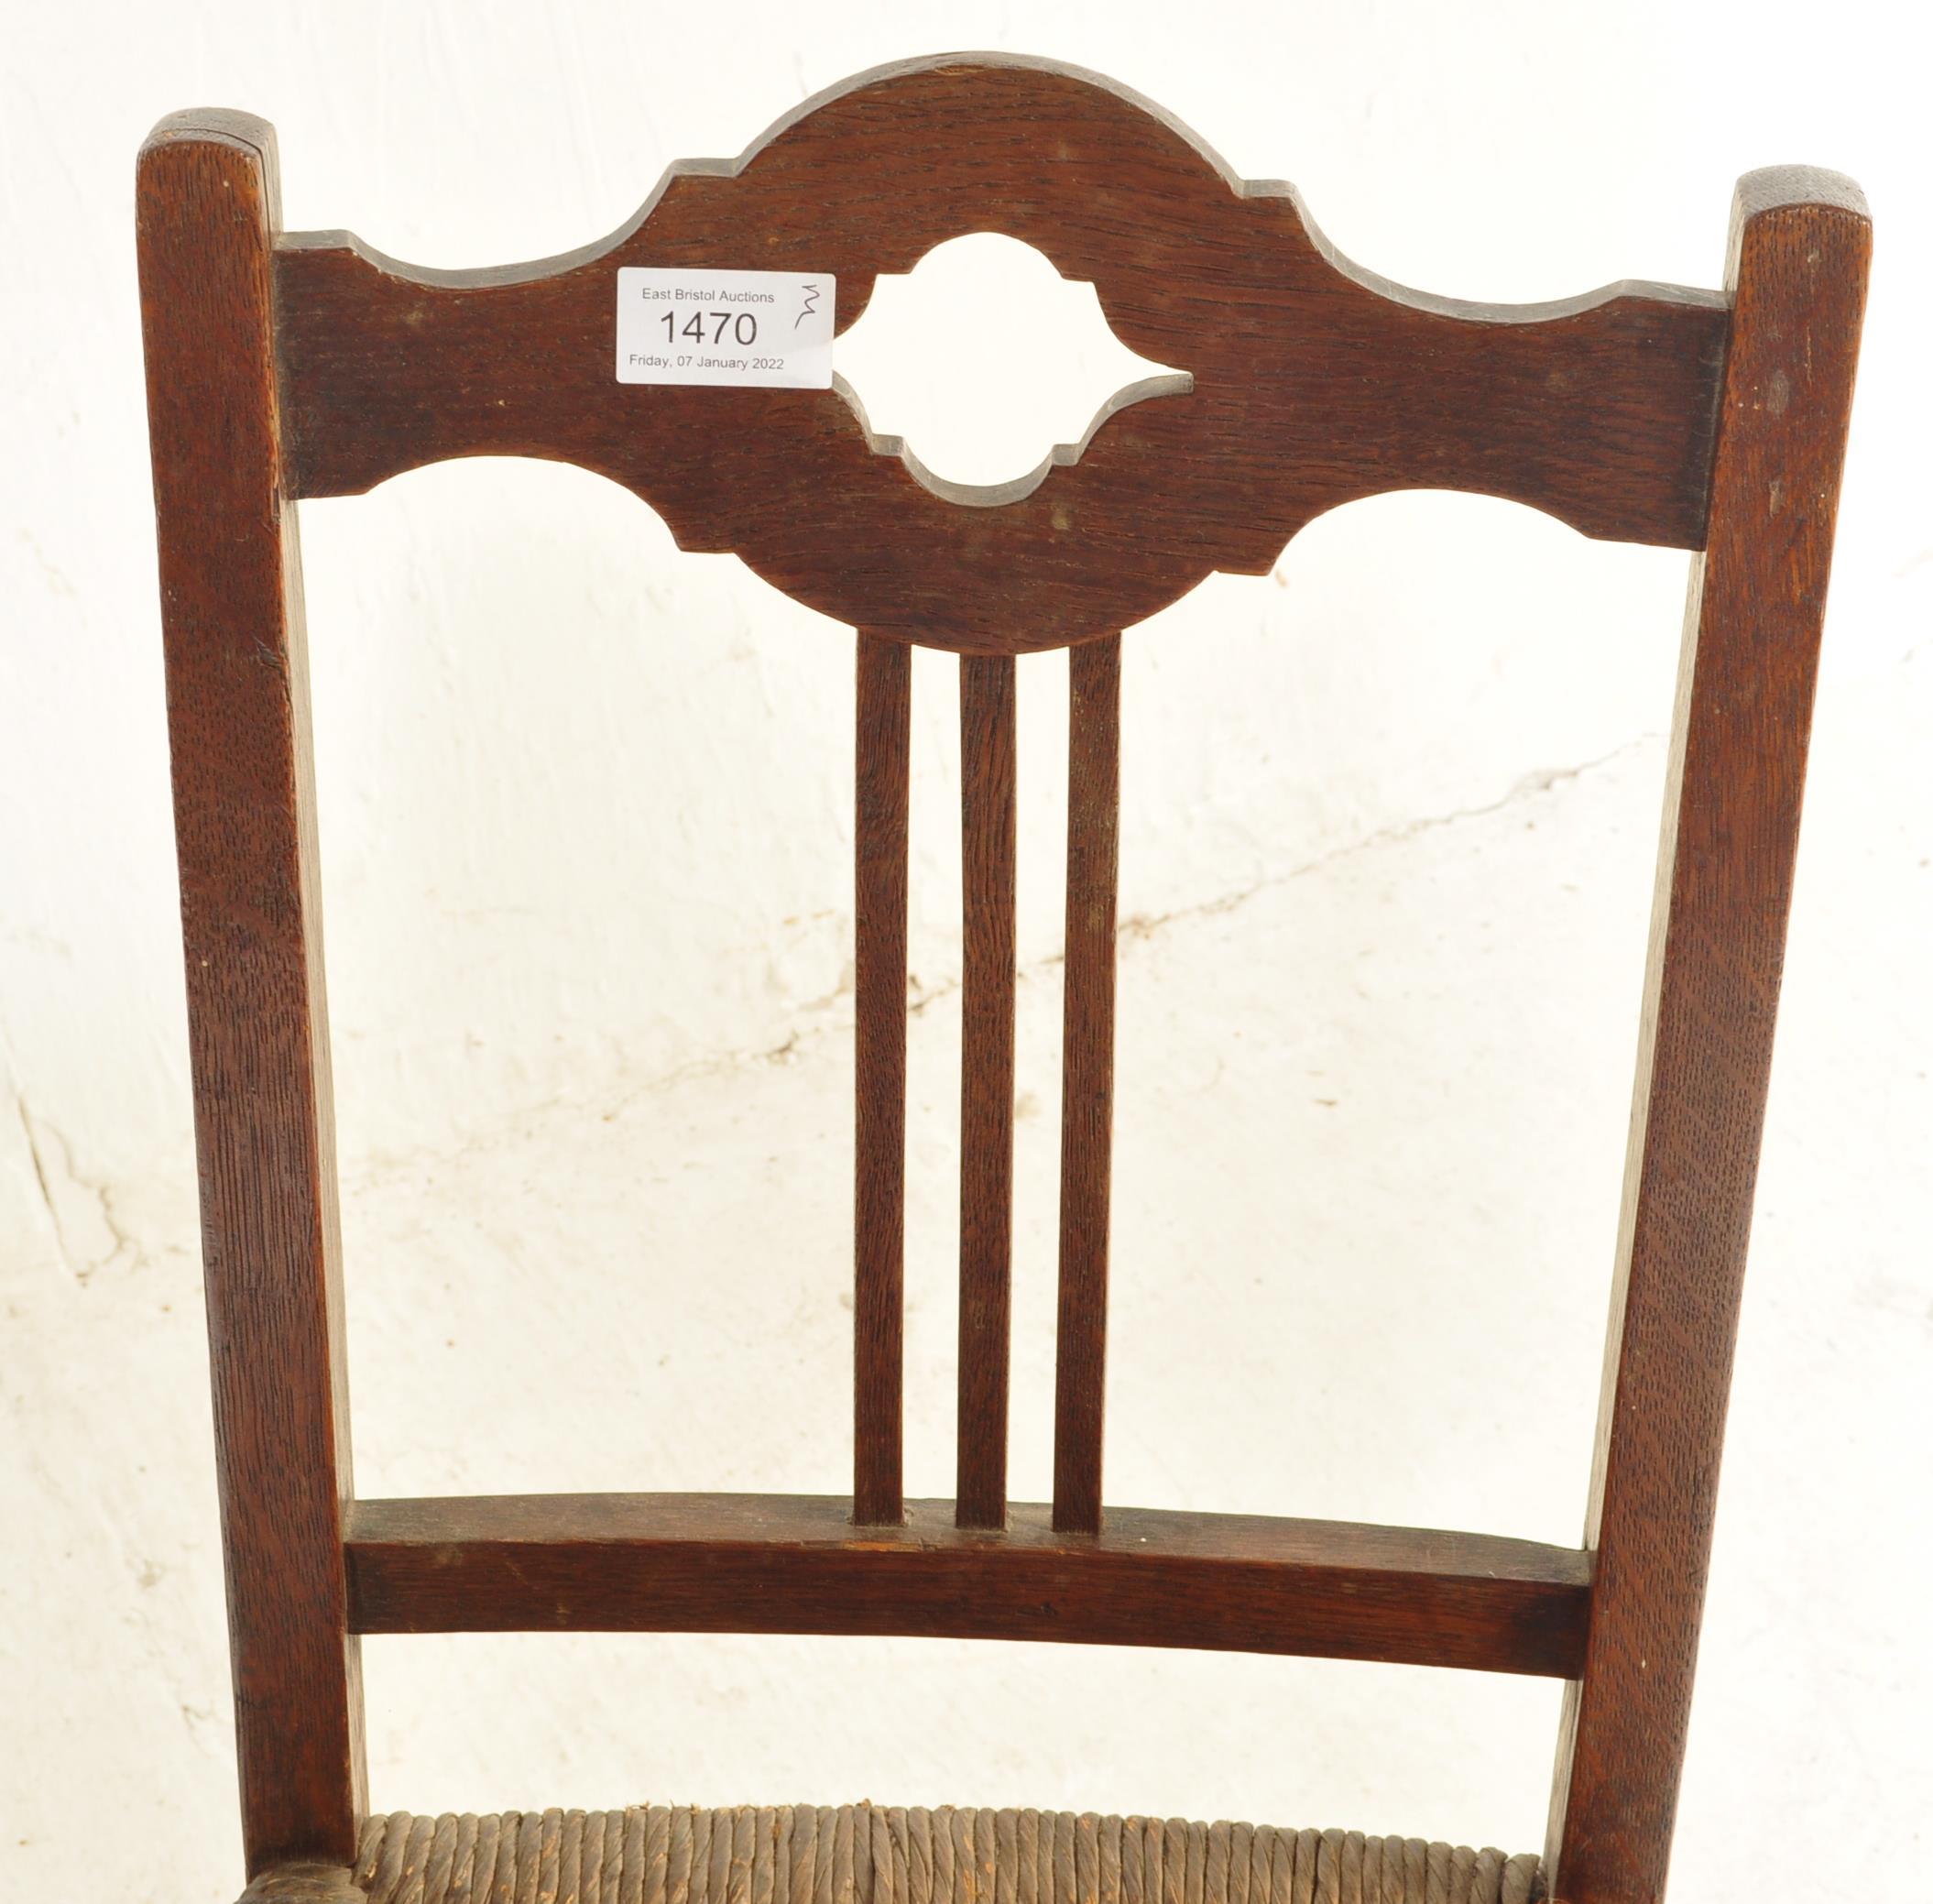 LATE 19TH CENTURY ARTS & CRAFTS CHILDS ROCKING CHAIR - Image 4 of 6